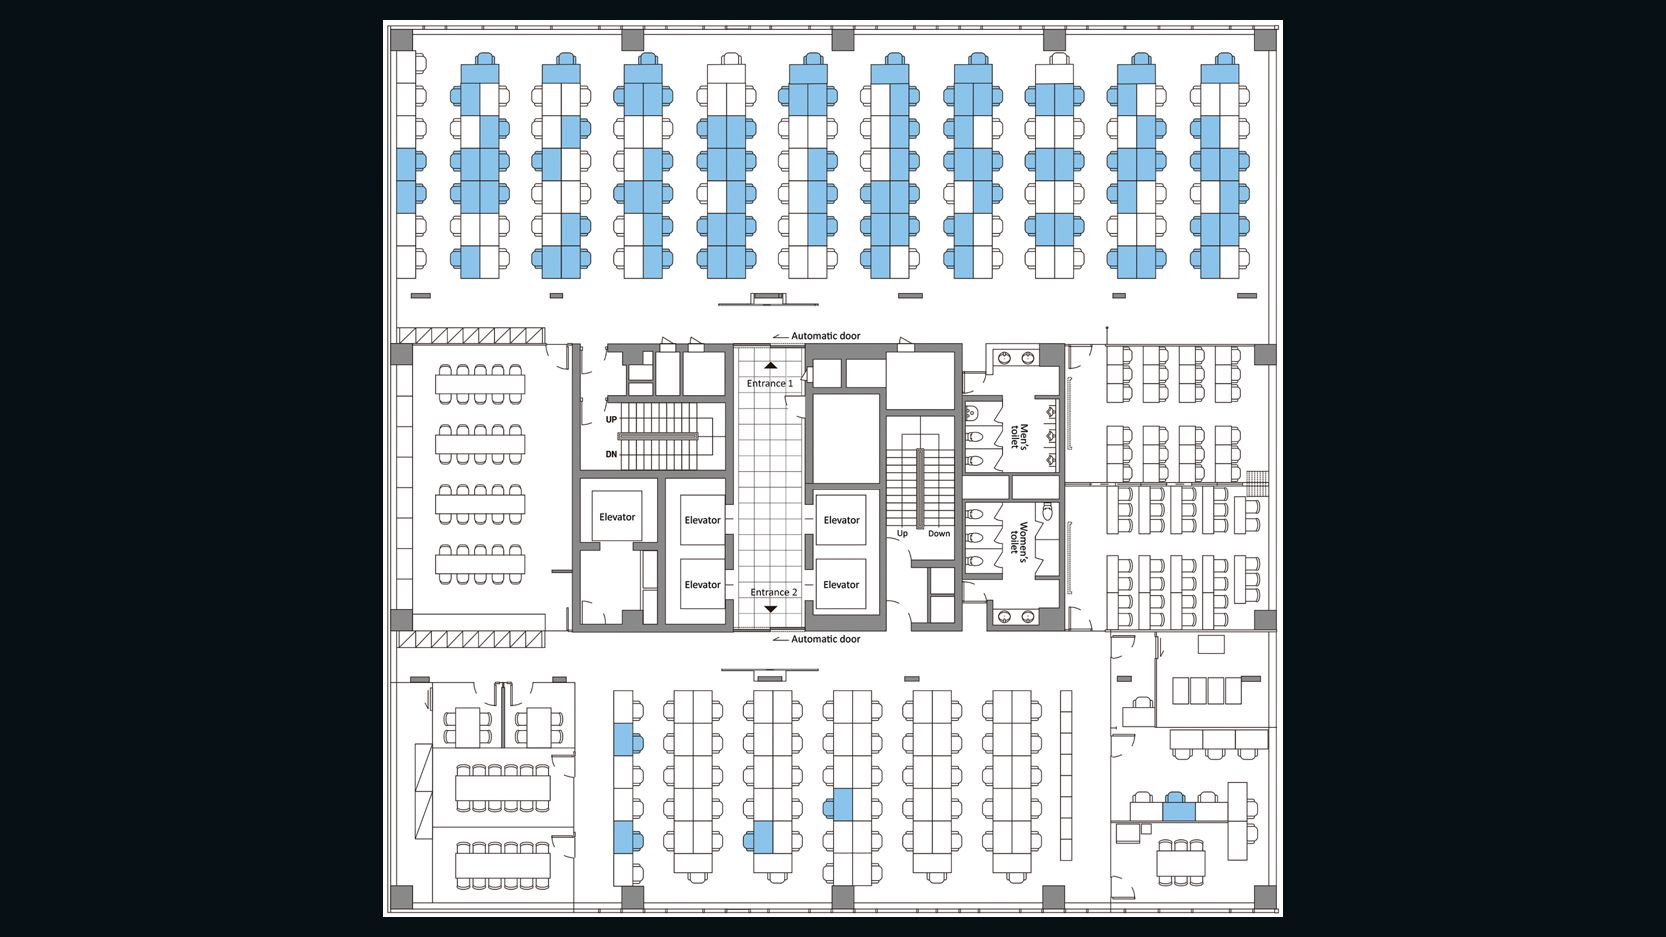 A diagram from the CDC site shows the floor plan of the 11th floor of a building in Seoul, South Korea, that was the site of a coronavirus disease outbreak in 2020. The blue shading shows the seating locations of people who became infected.